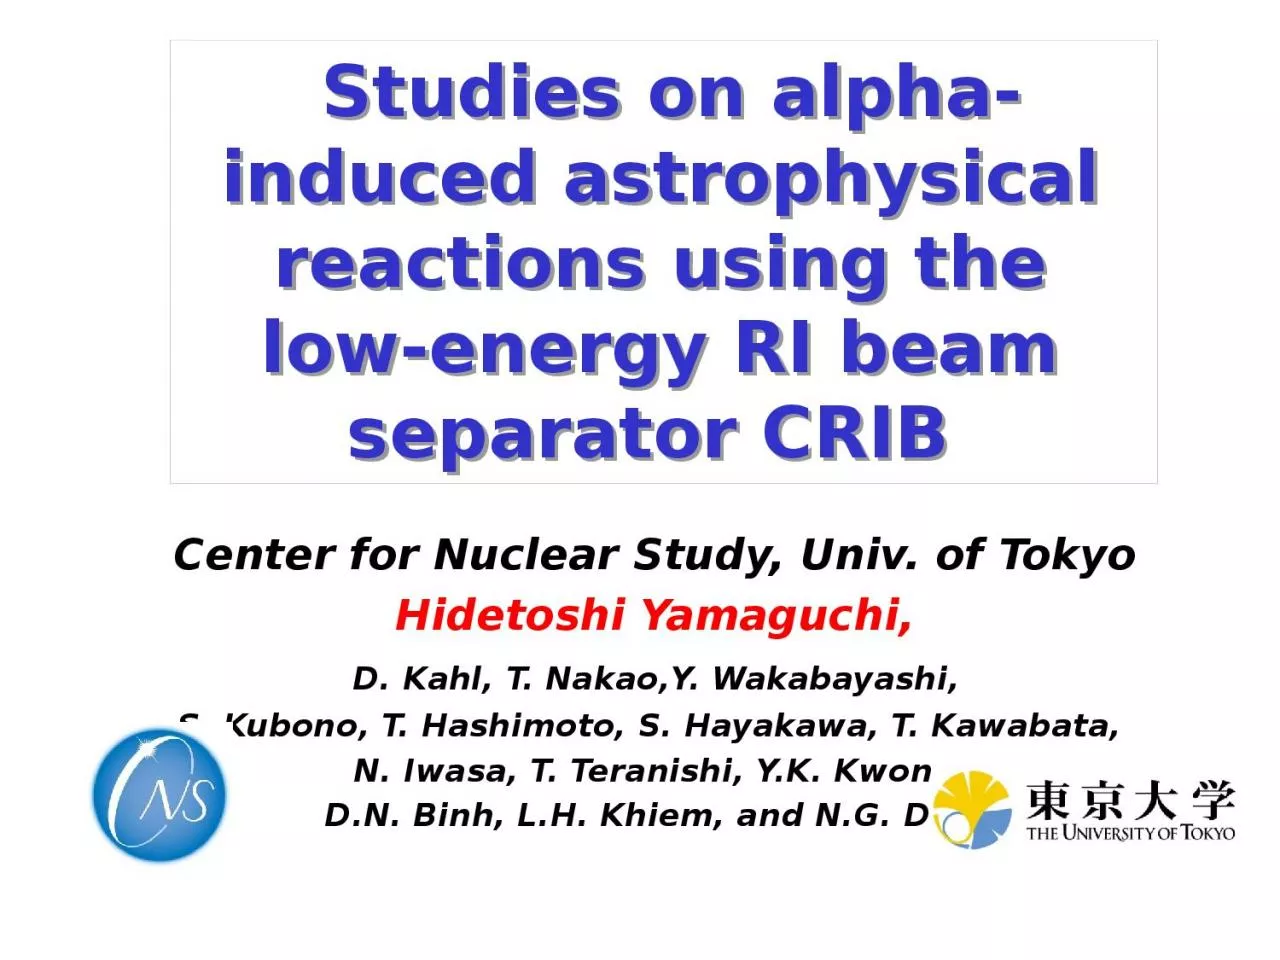 Studies on alpha-induced astrophysical reactions using the low-energy RI beam separator